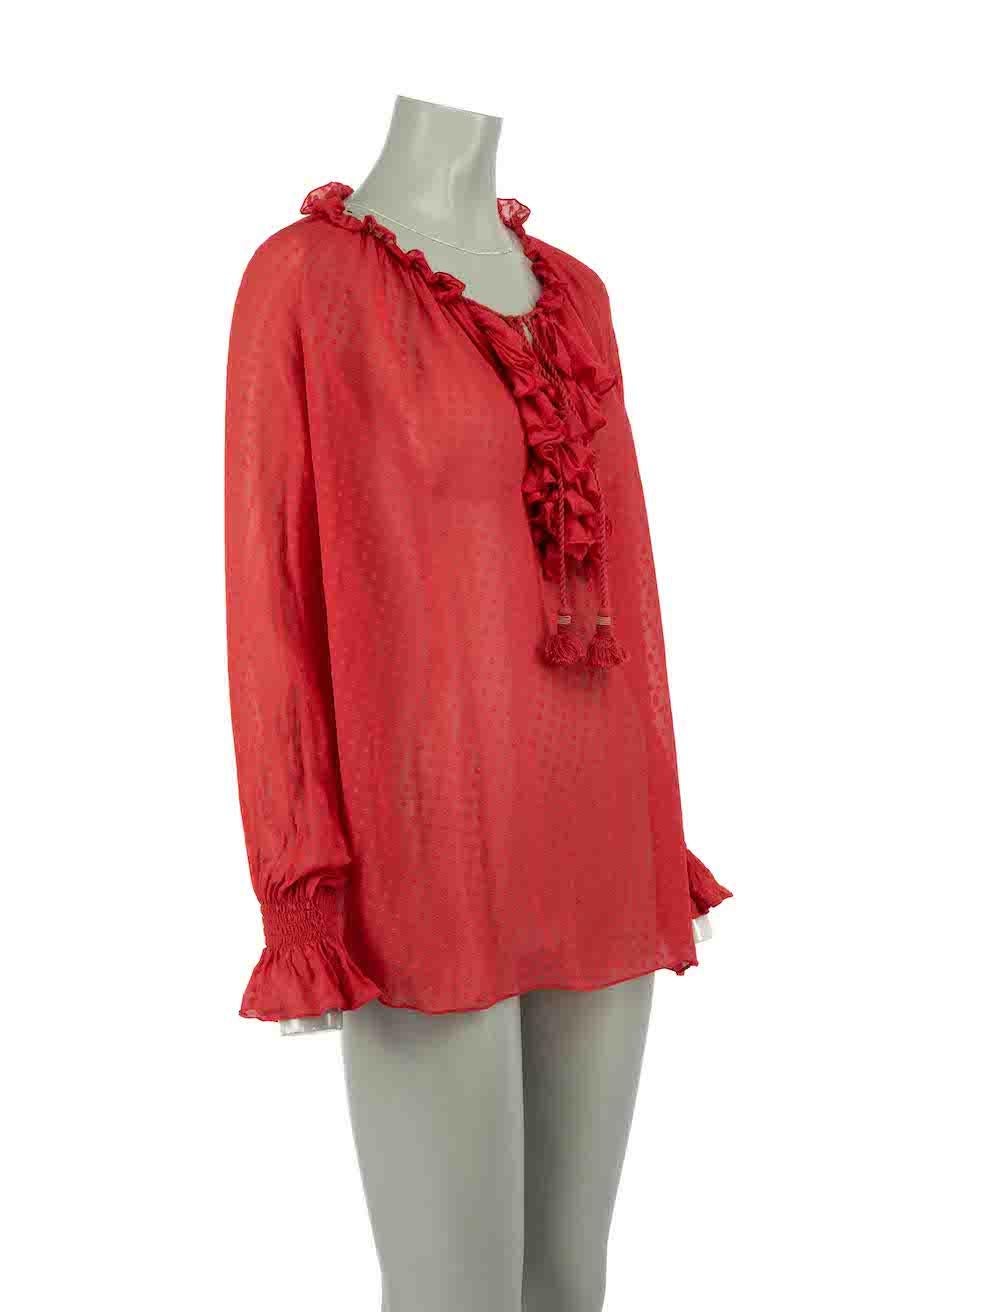 CONDITION is Very good. Minimal wear to top is evident. Minimal wear to with the composition label having been removed on this used Roberto Cavalli designer resale item.
 
 Details
 Red
 Silk
 Blouse
 Dotted pattern
 Sheer
 Ruffle detail
 Long